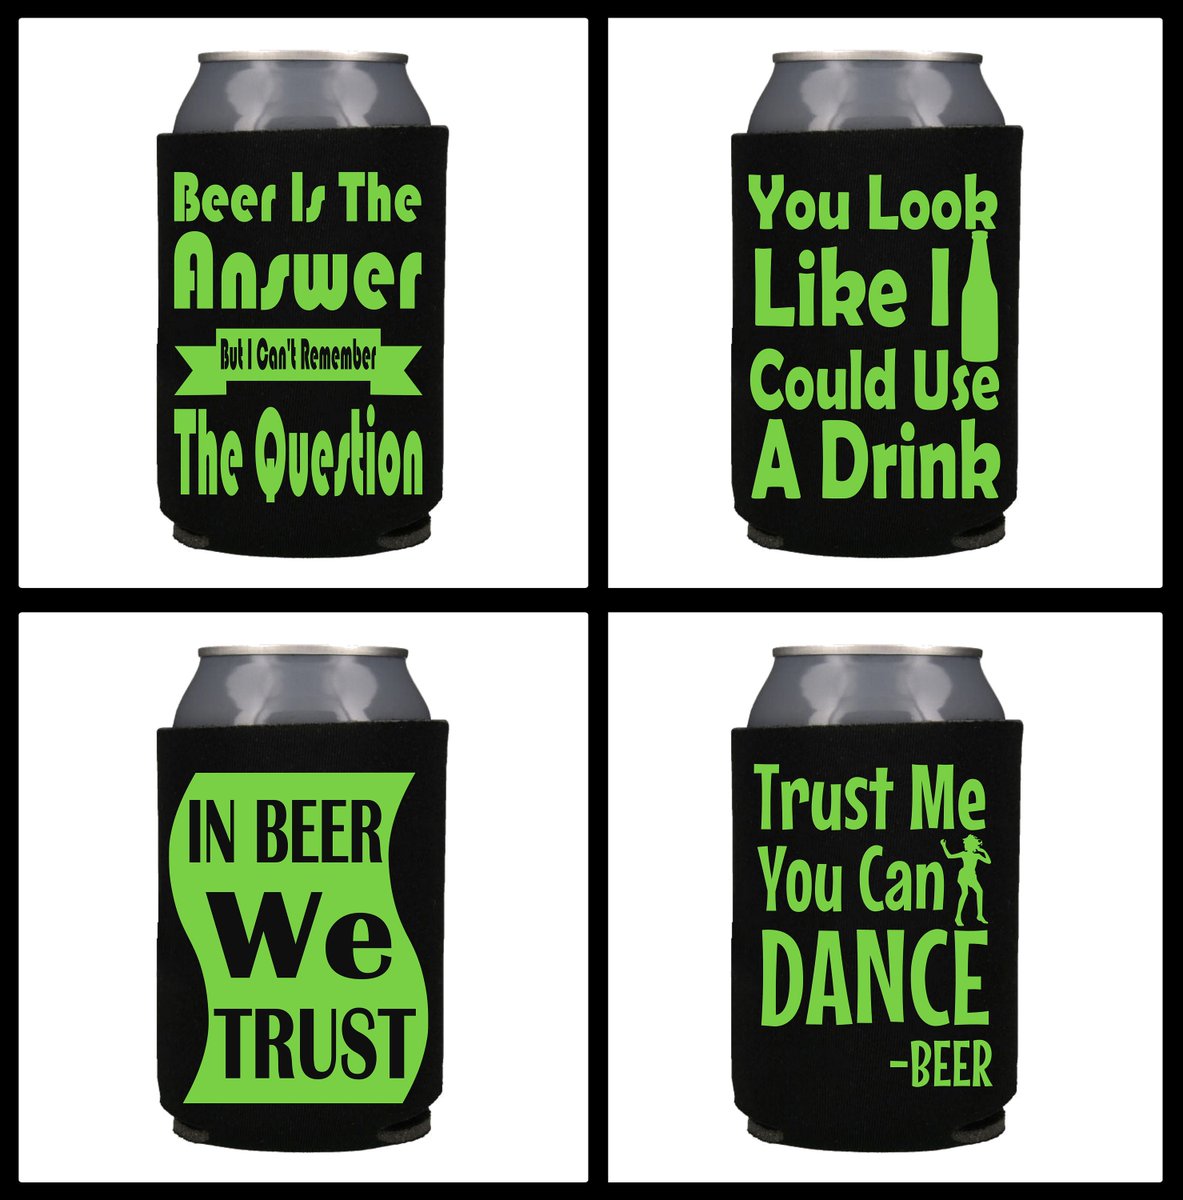 Trust Me You Can Dance - Beer, In Beer We Trust, You Look Like I Could Use A Drink, Beer is the Answer But I Forgot the Question Can Coolers etsy.me/2QNrTK5 #custombirthdayfavors #cankoozies #koozies #cancoolers #canhuggers #souvenir